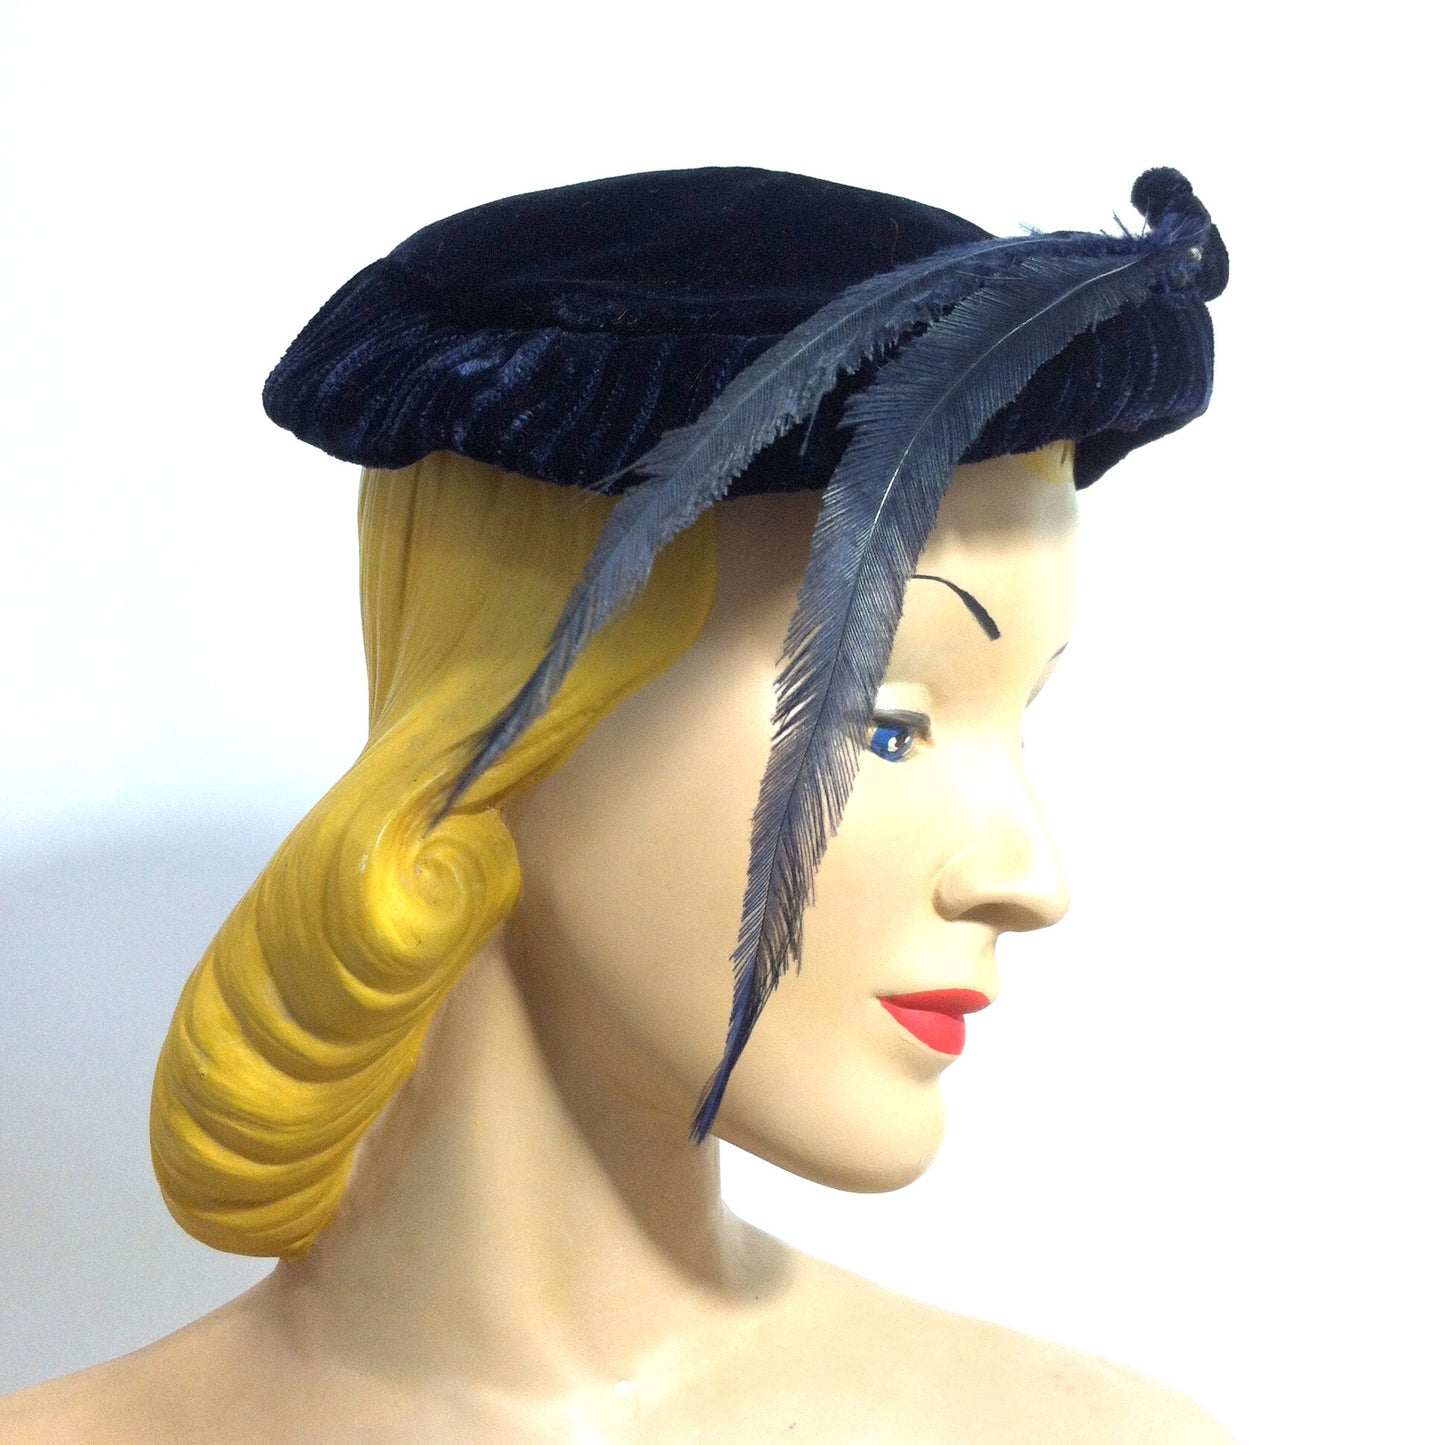 Sapphire Blue Velvet Cocktail Hat with Feather and Rhinestones circa 1950s